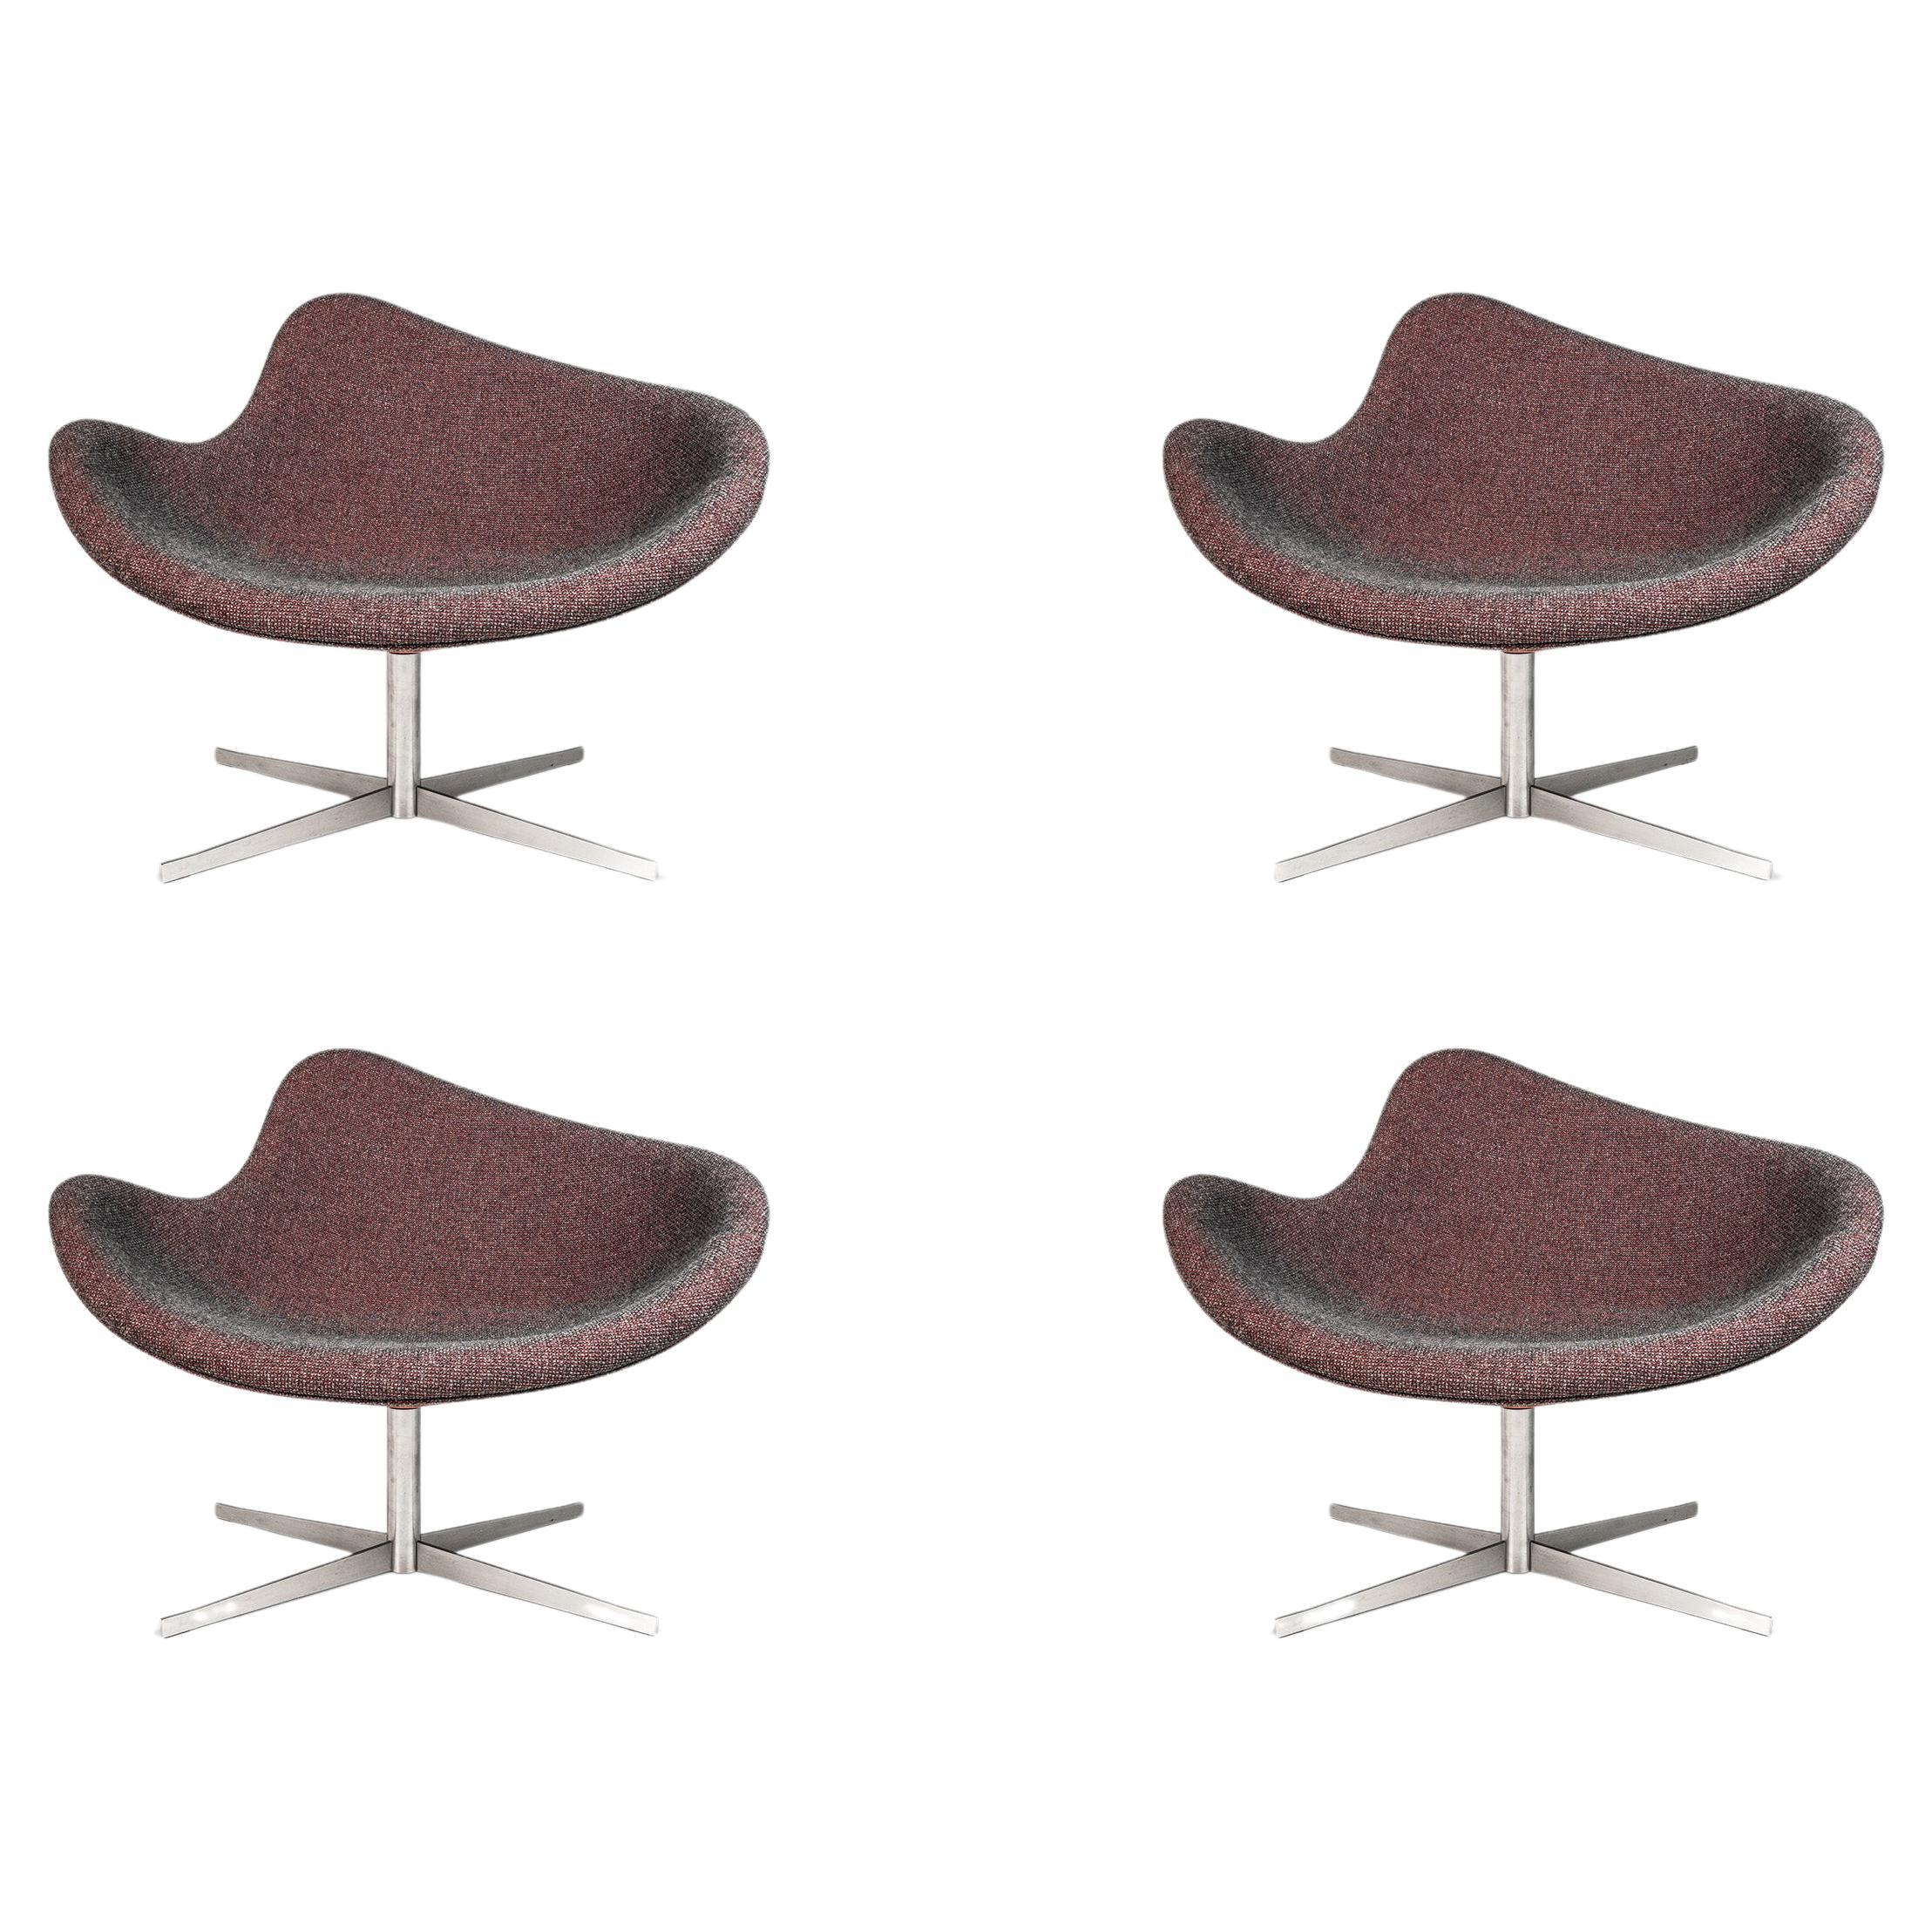 Set of 4 Postmodern Swivel "K2" Magenta Chairs by Busk & Hertzog, USA, c. 2000's For Sale